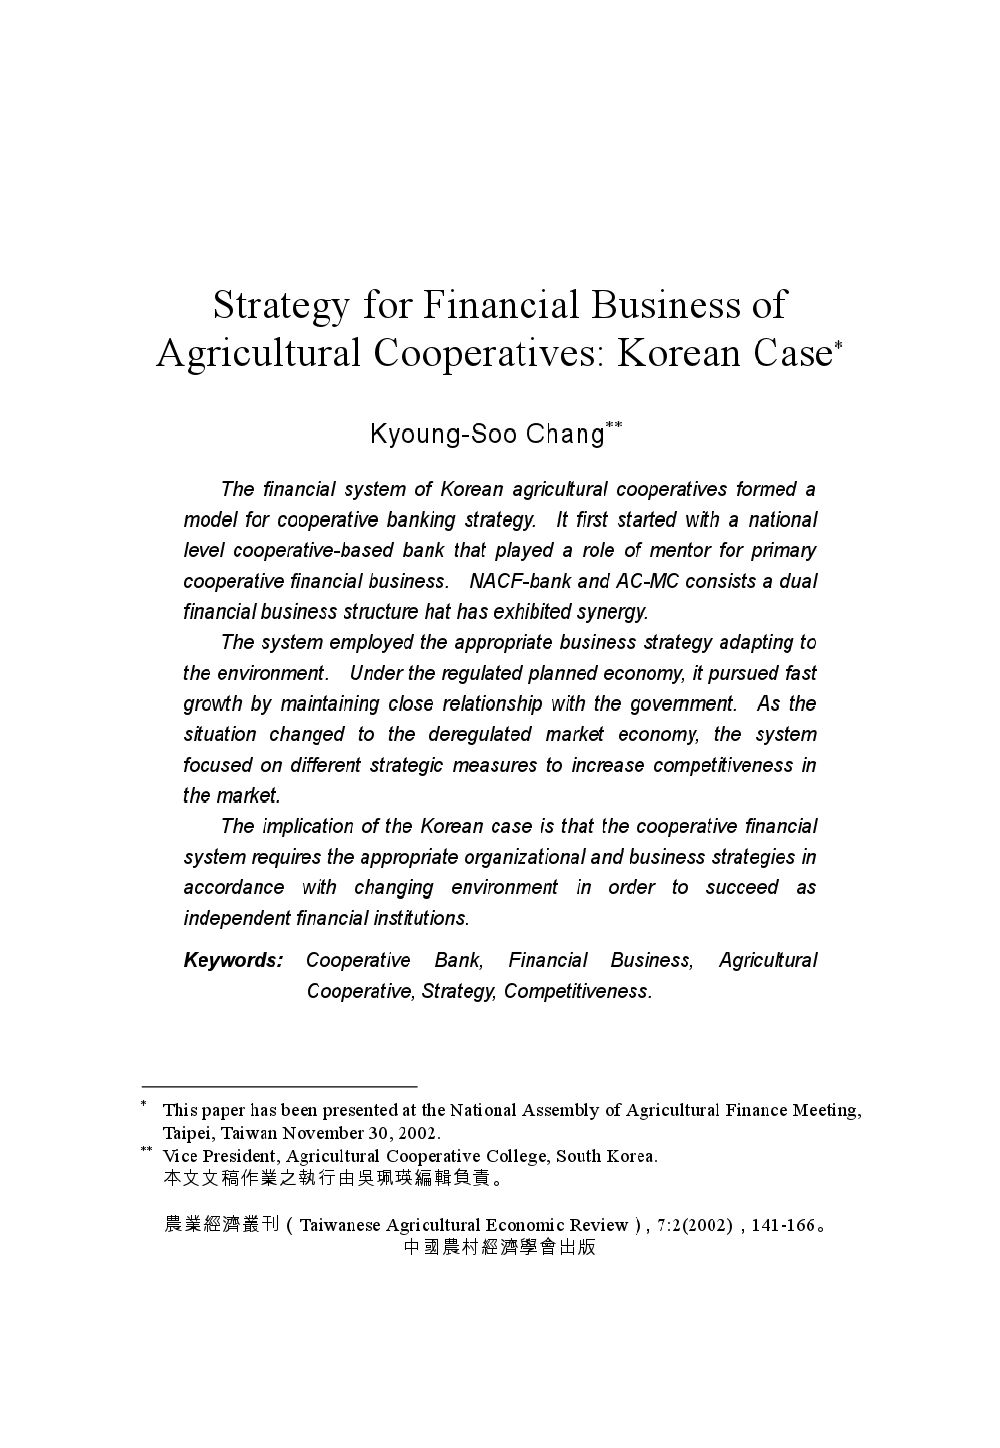 Strategy_for_Financial_Business_of_Agricultural_Cooperatives-Korean_Case.jpg